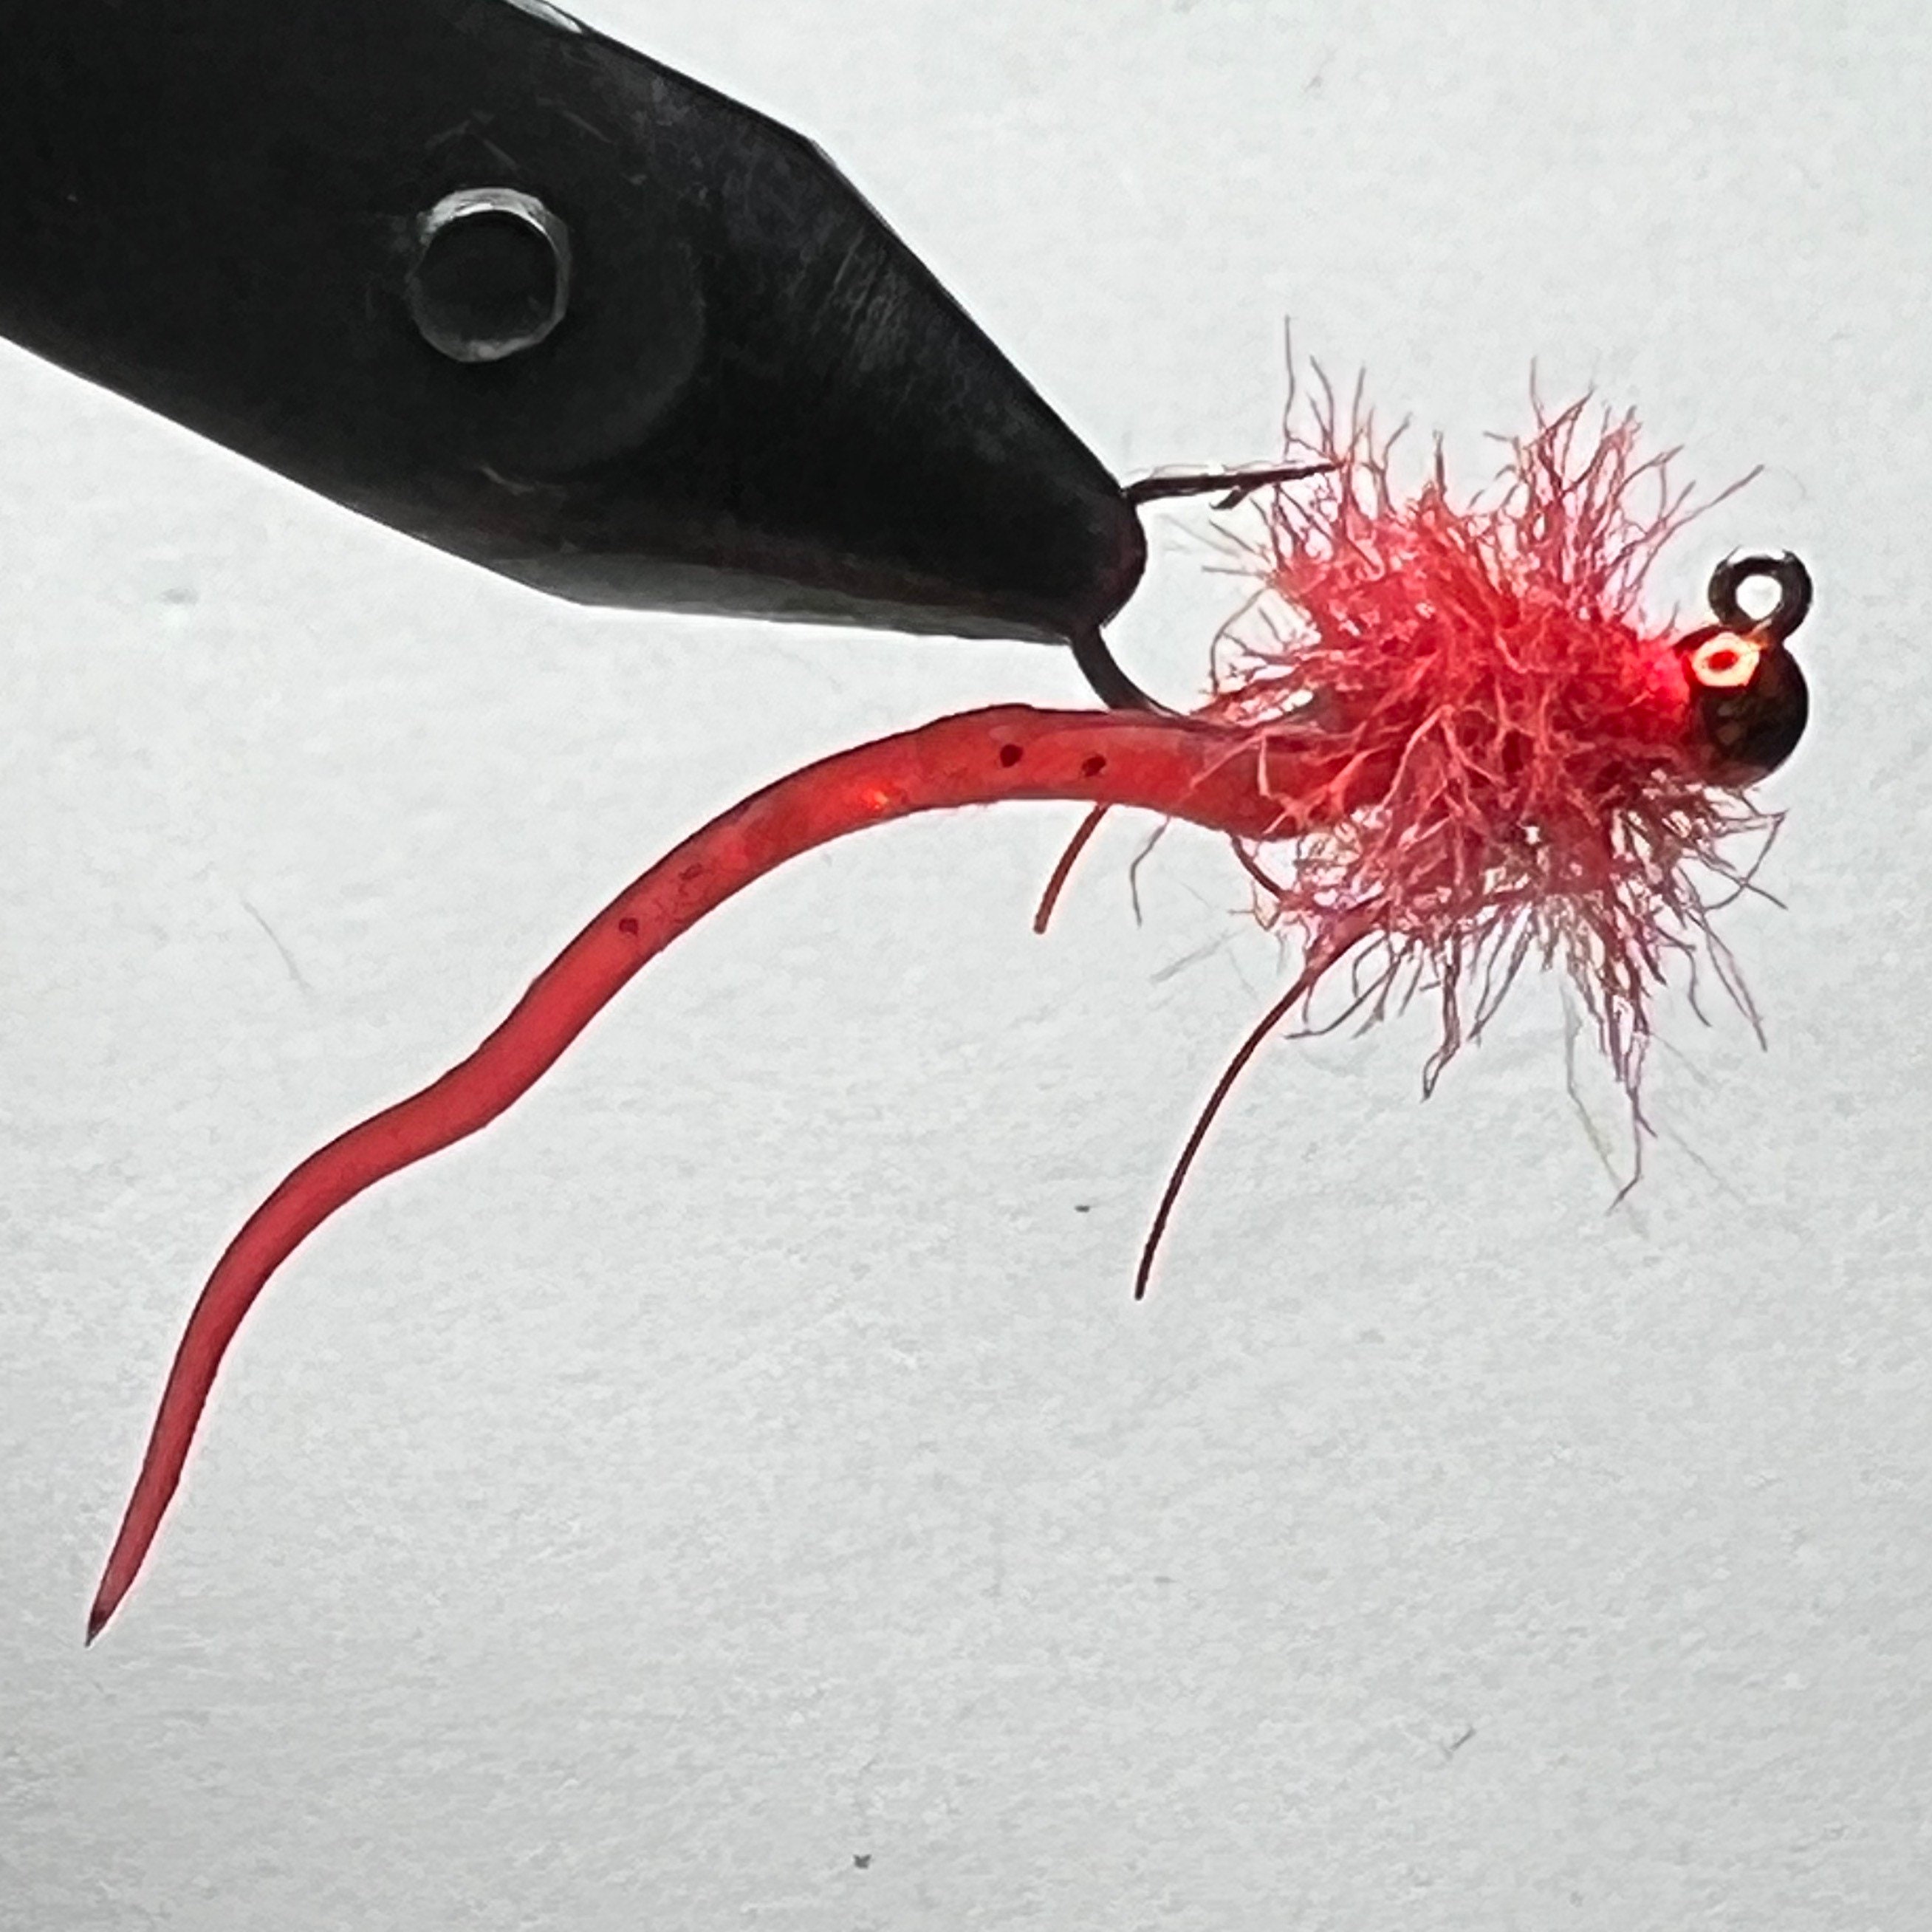 squiggly worm squirmy fishing fly-Troutflies UK